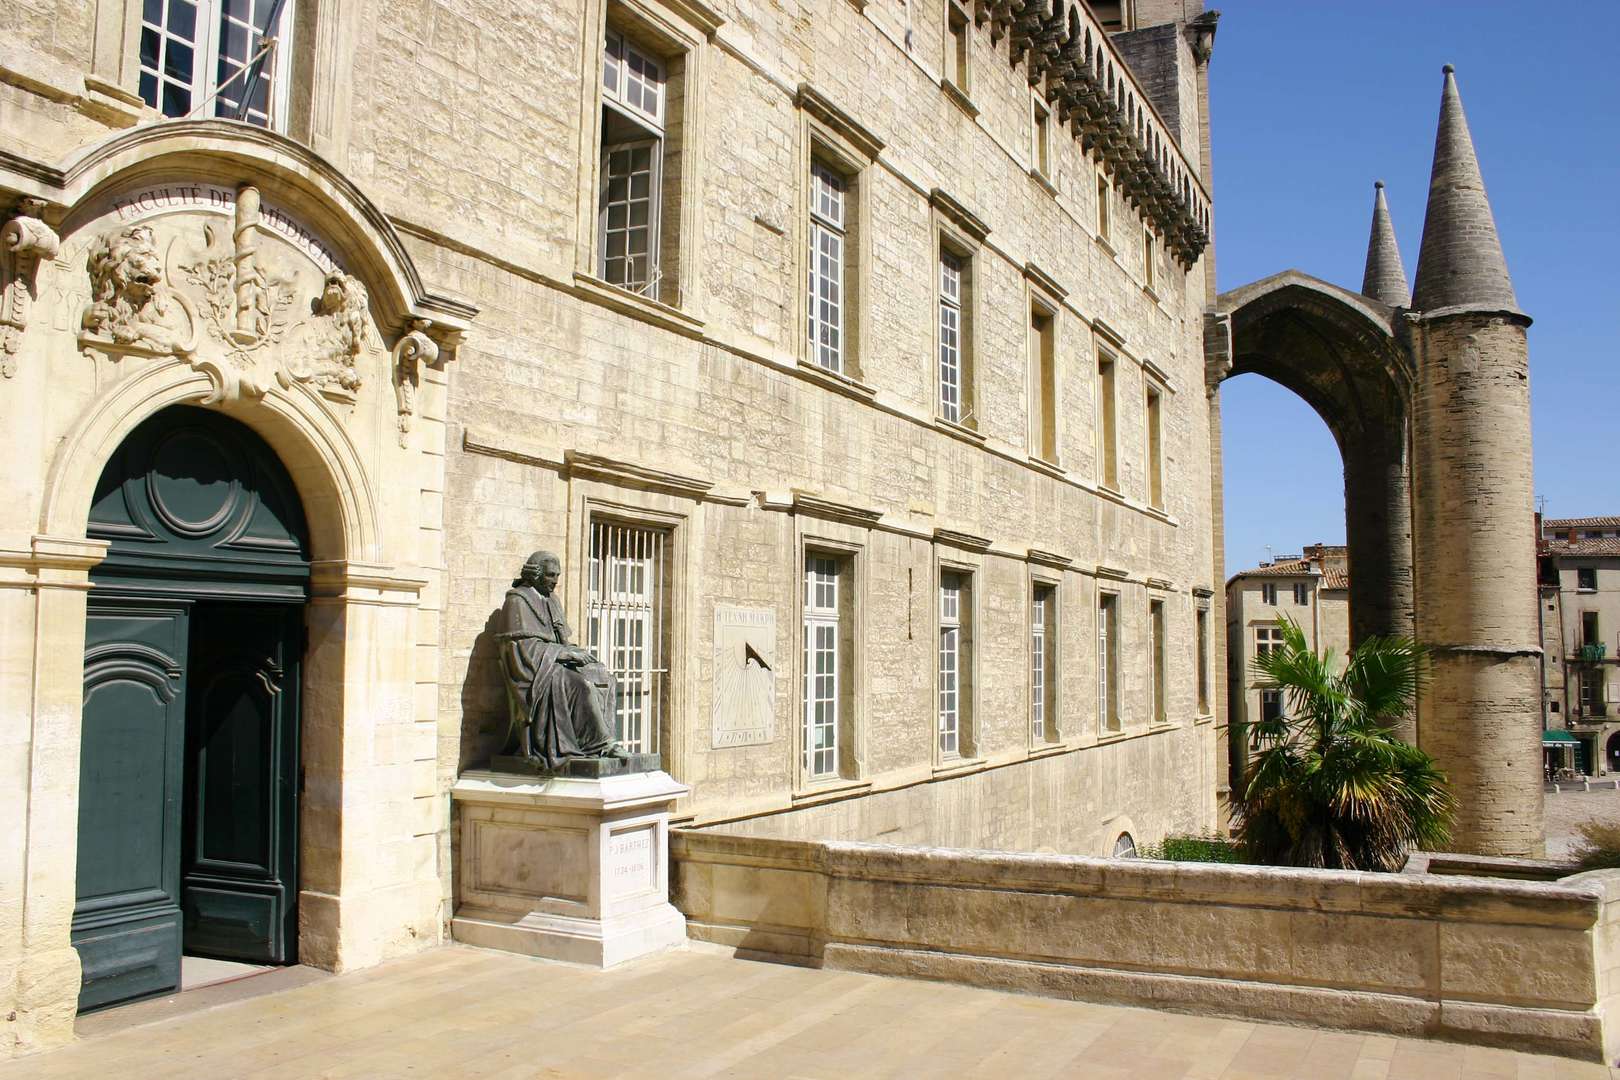 An employee of the Institute of Biophysics of ANAS was sent on a business trip to the University of Montpellier in France